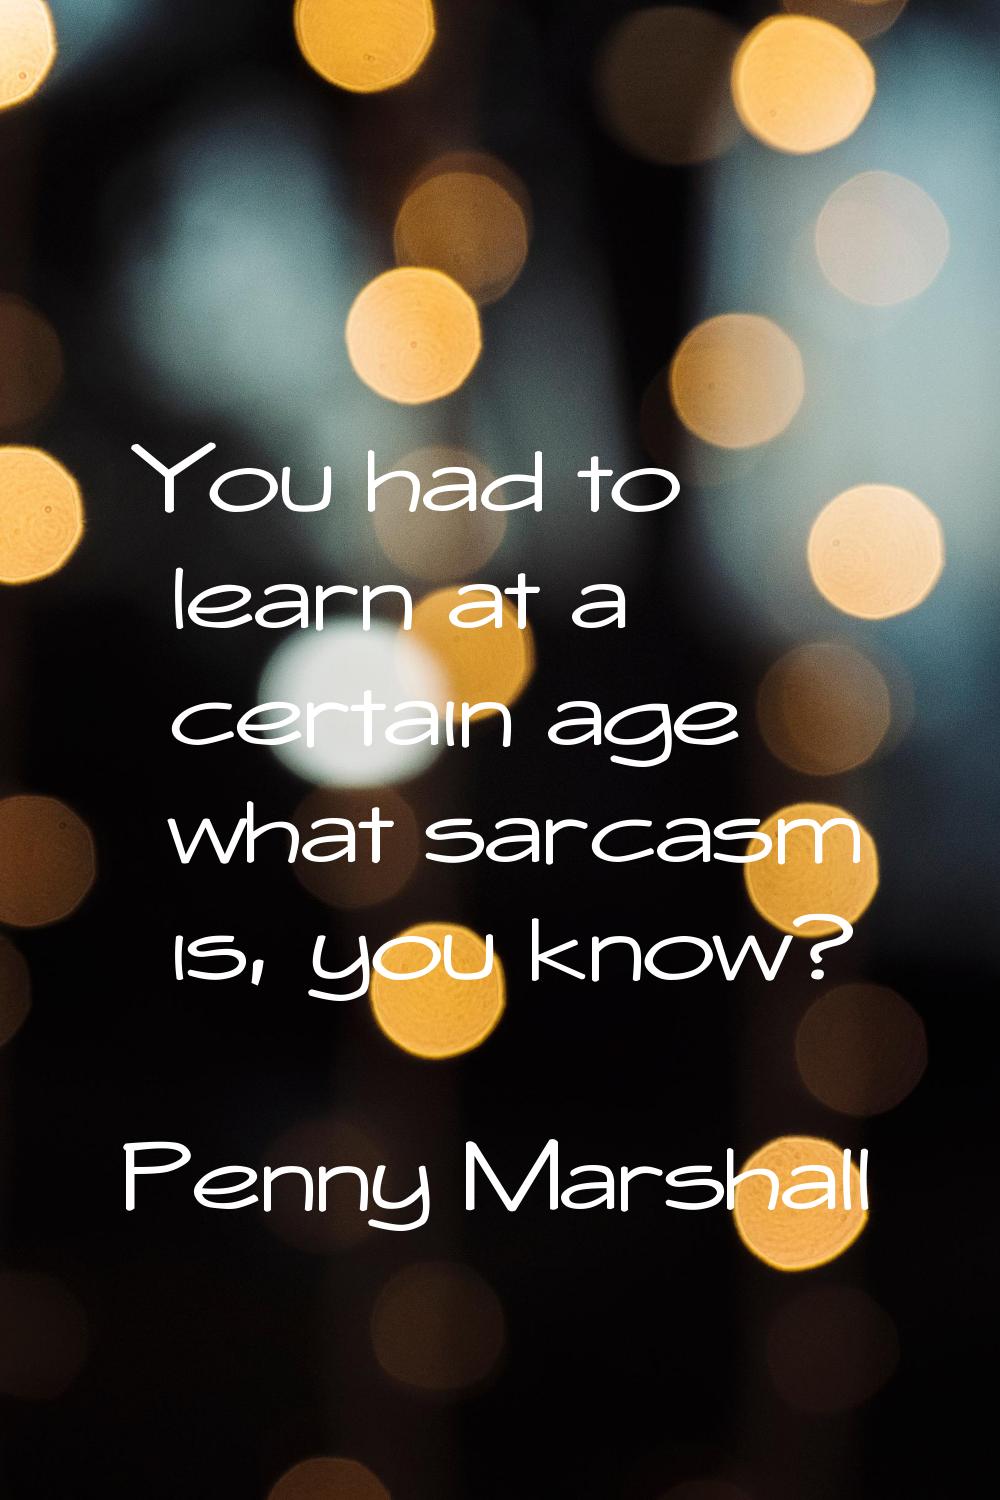 You had to learn at a certain age what sarcasm is, you know?